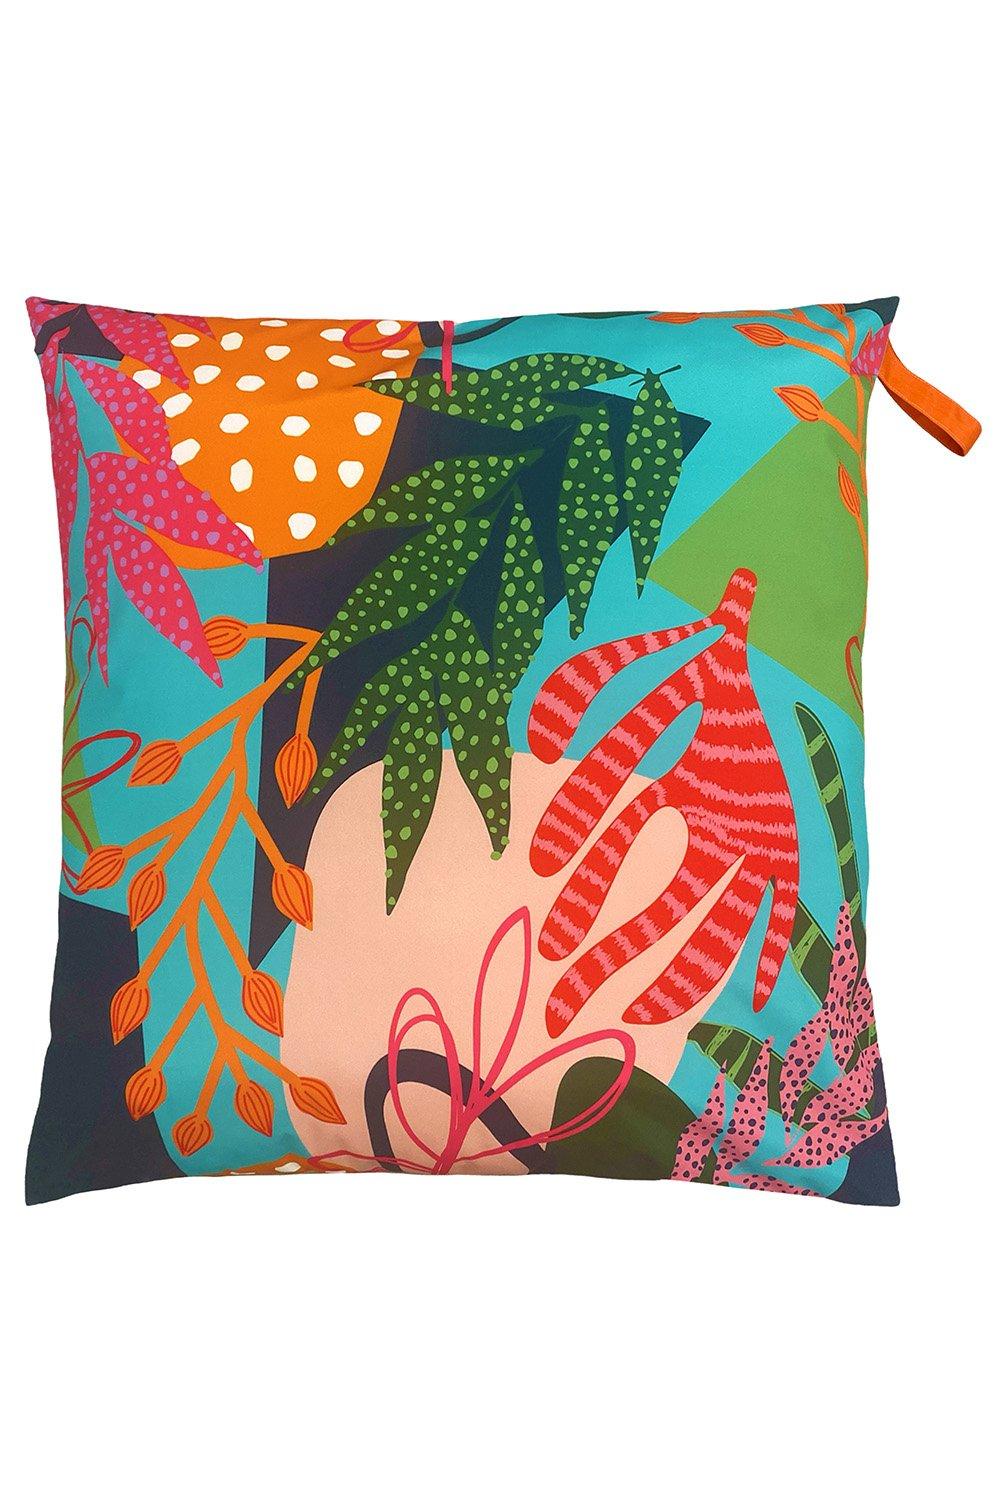 Coralina Printed Outdoor UV and Water Resistant Floor Cushion